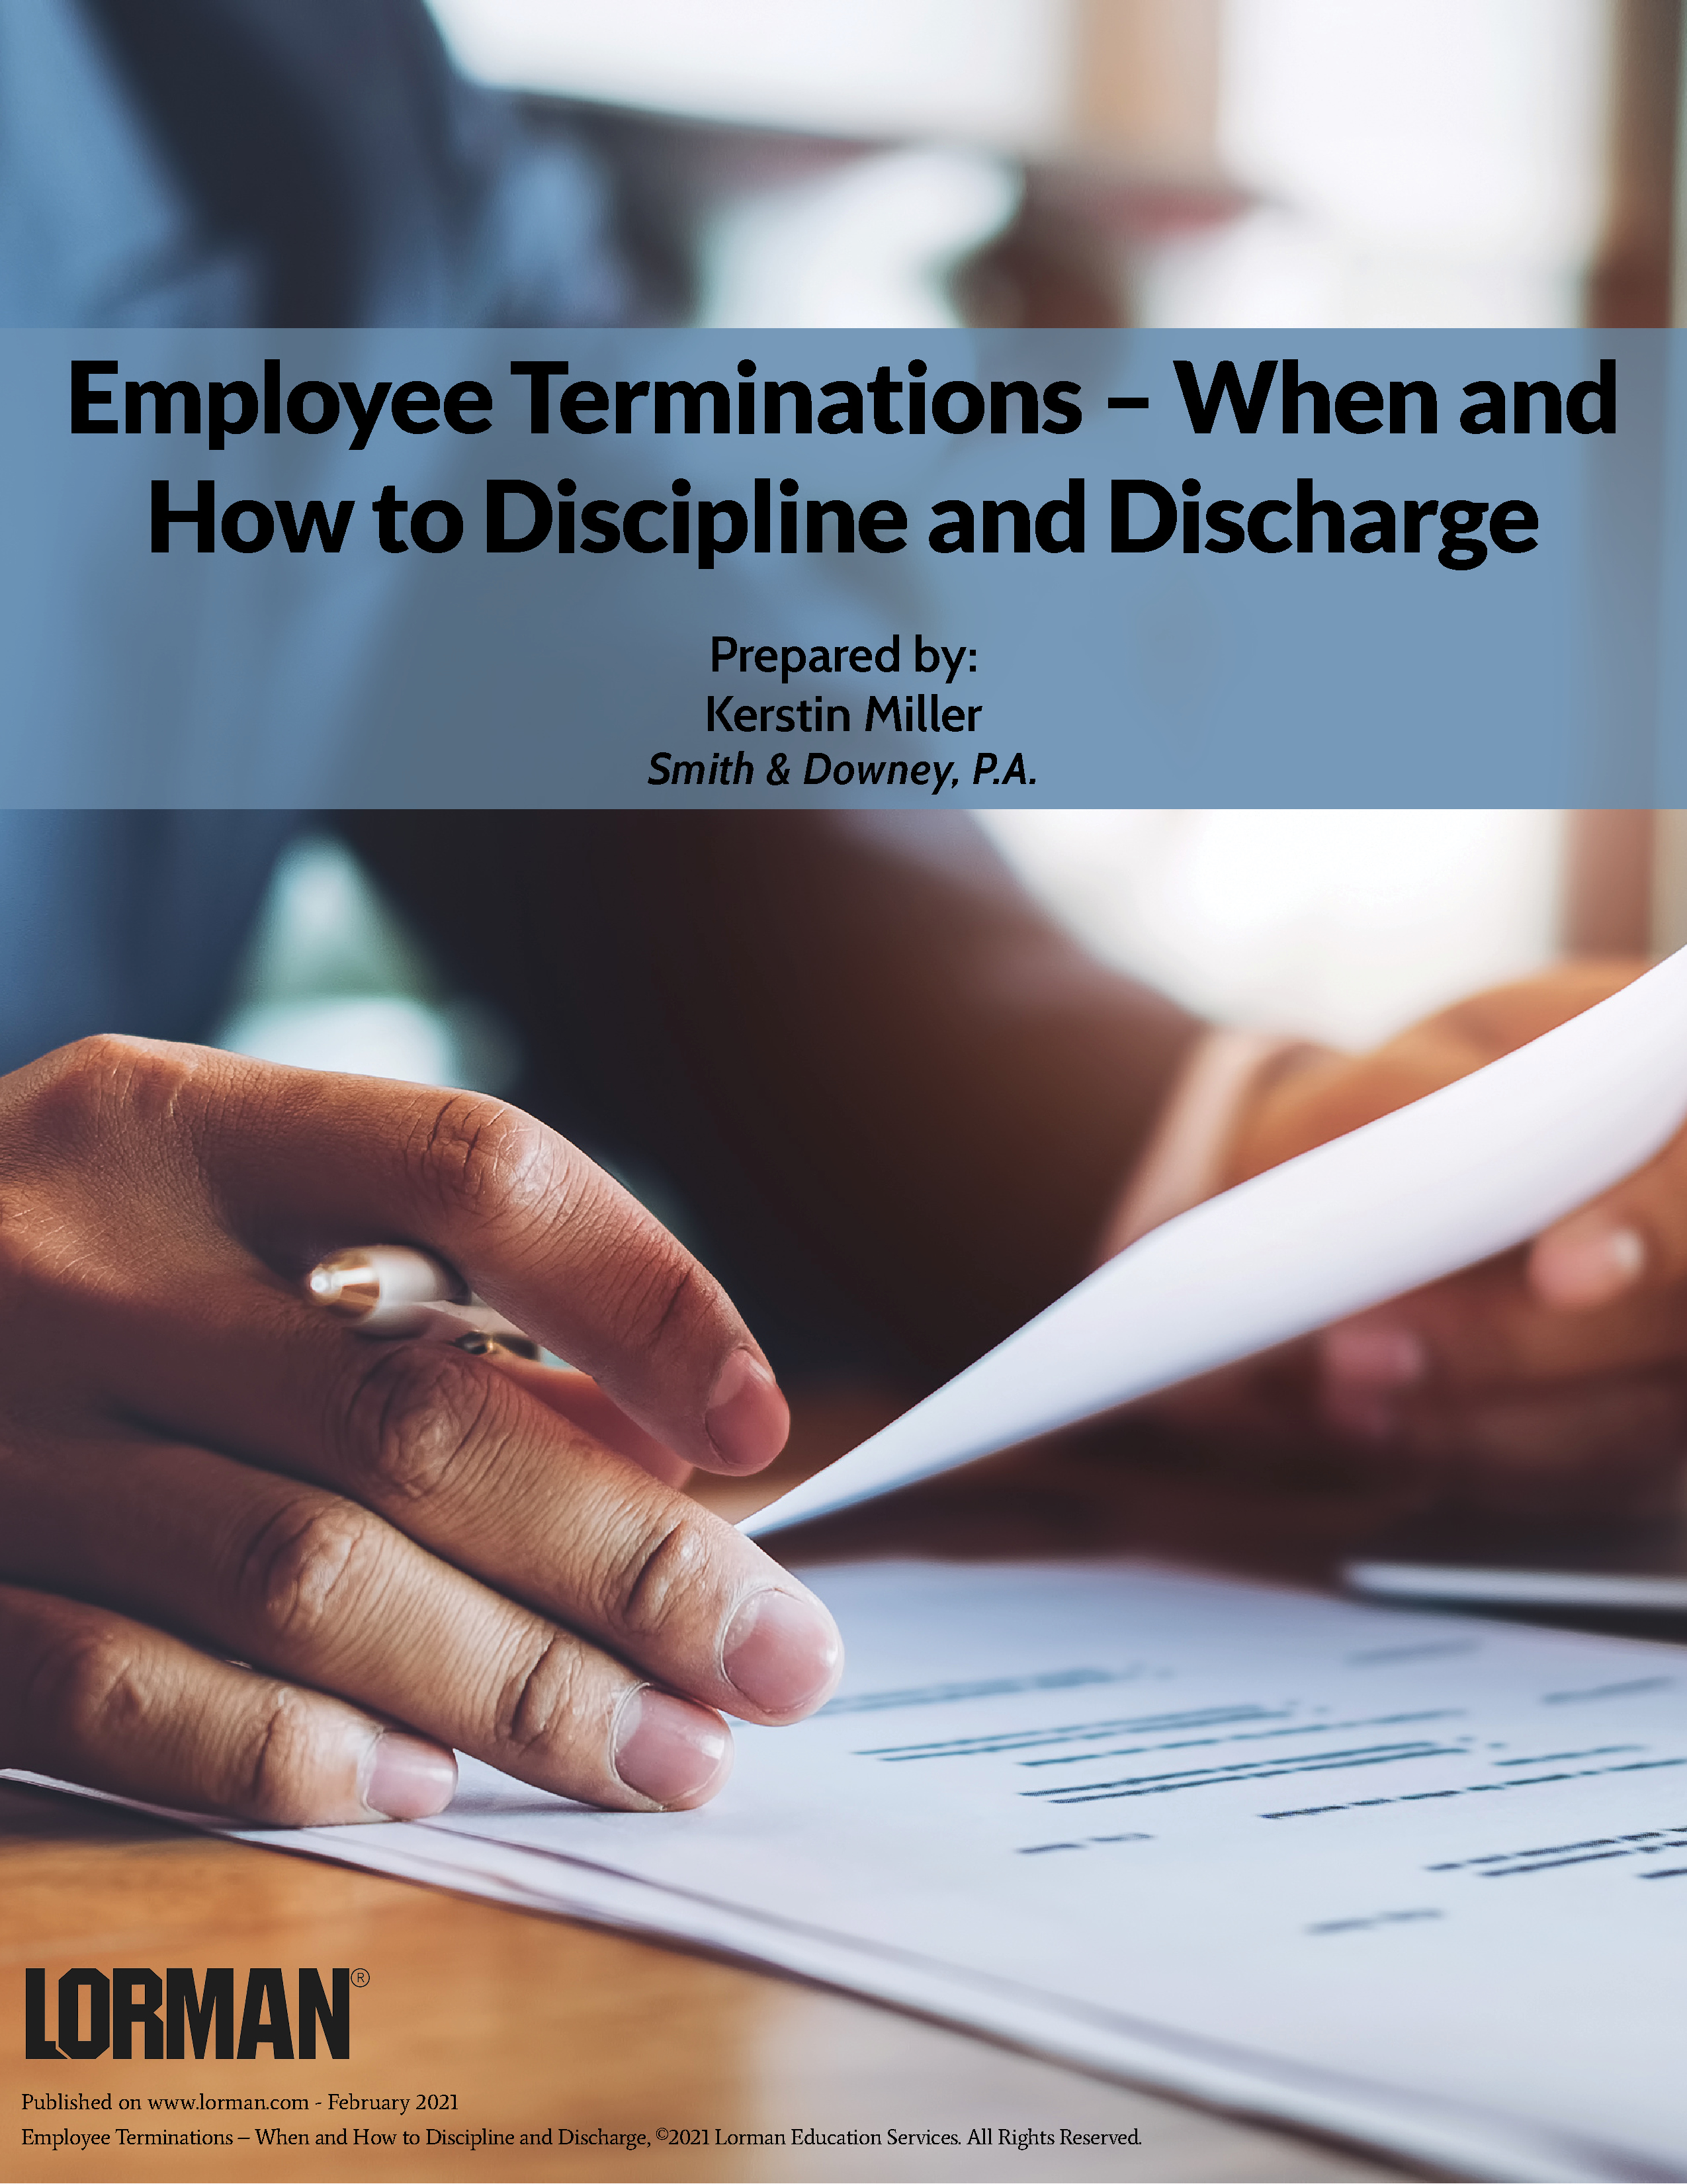 Employee Terminations – When and How to Discipline and Discharge